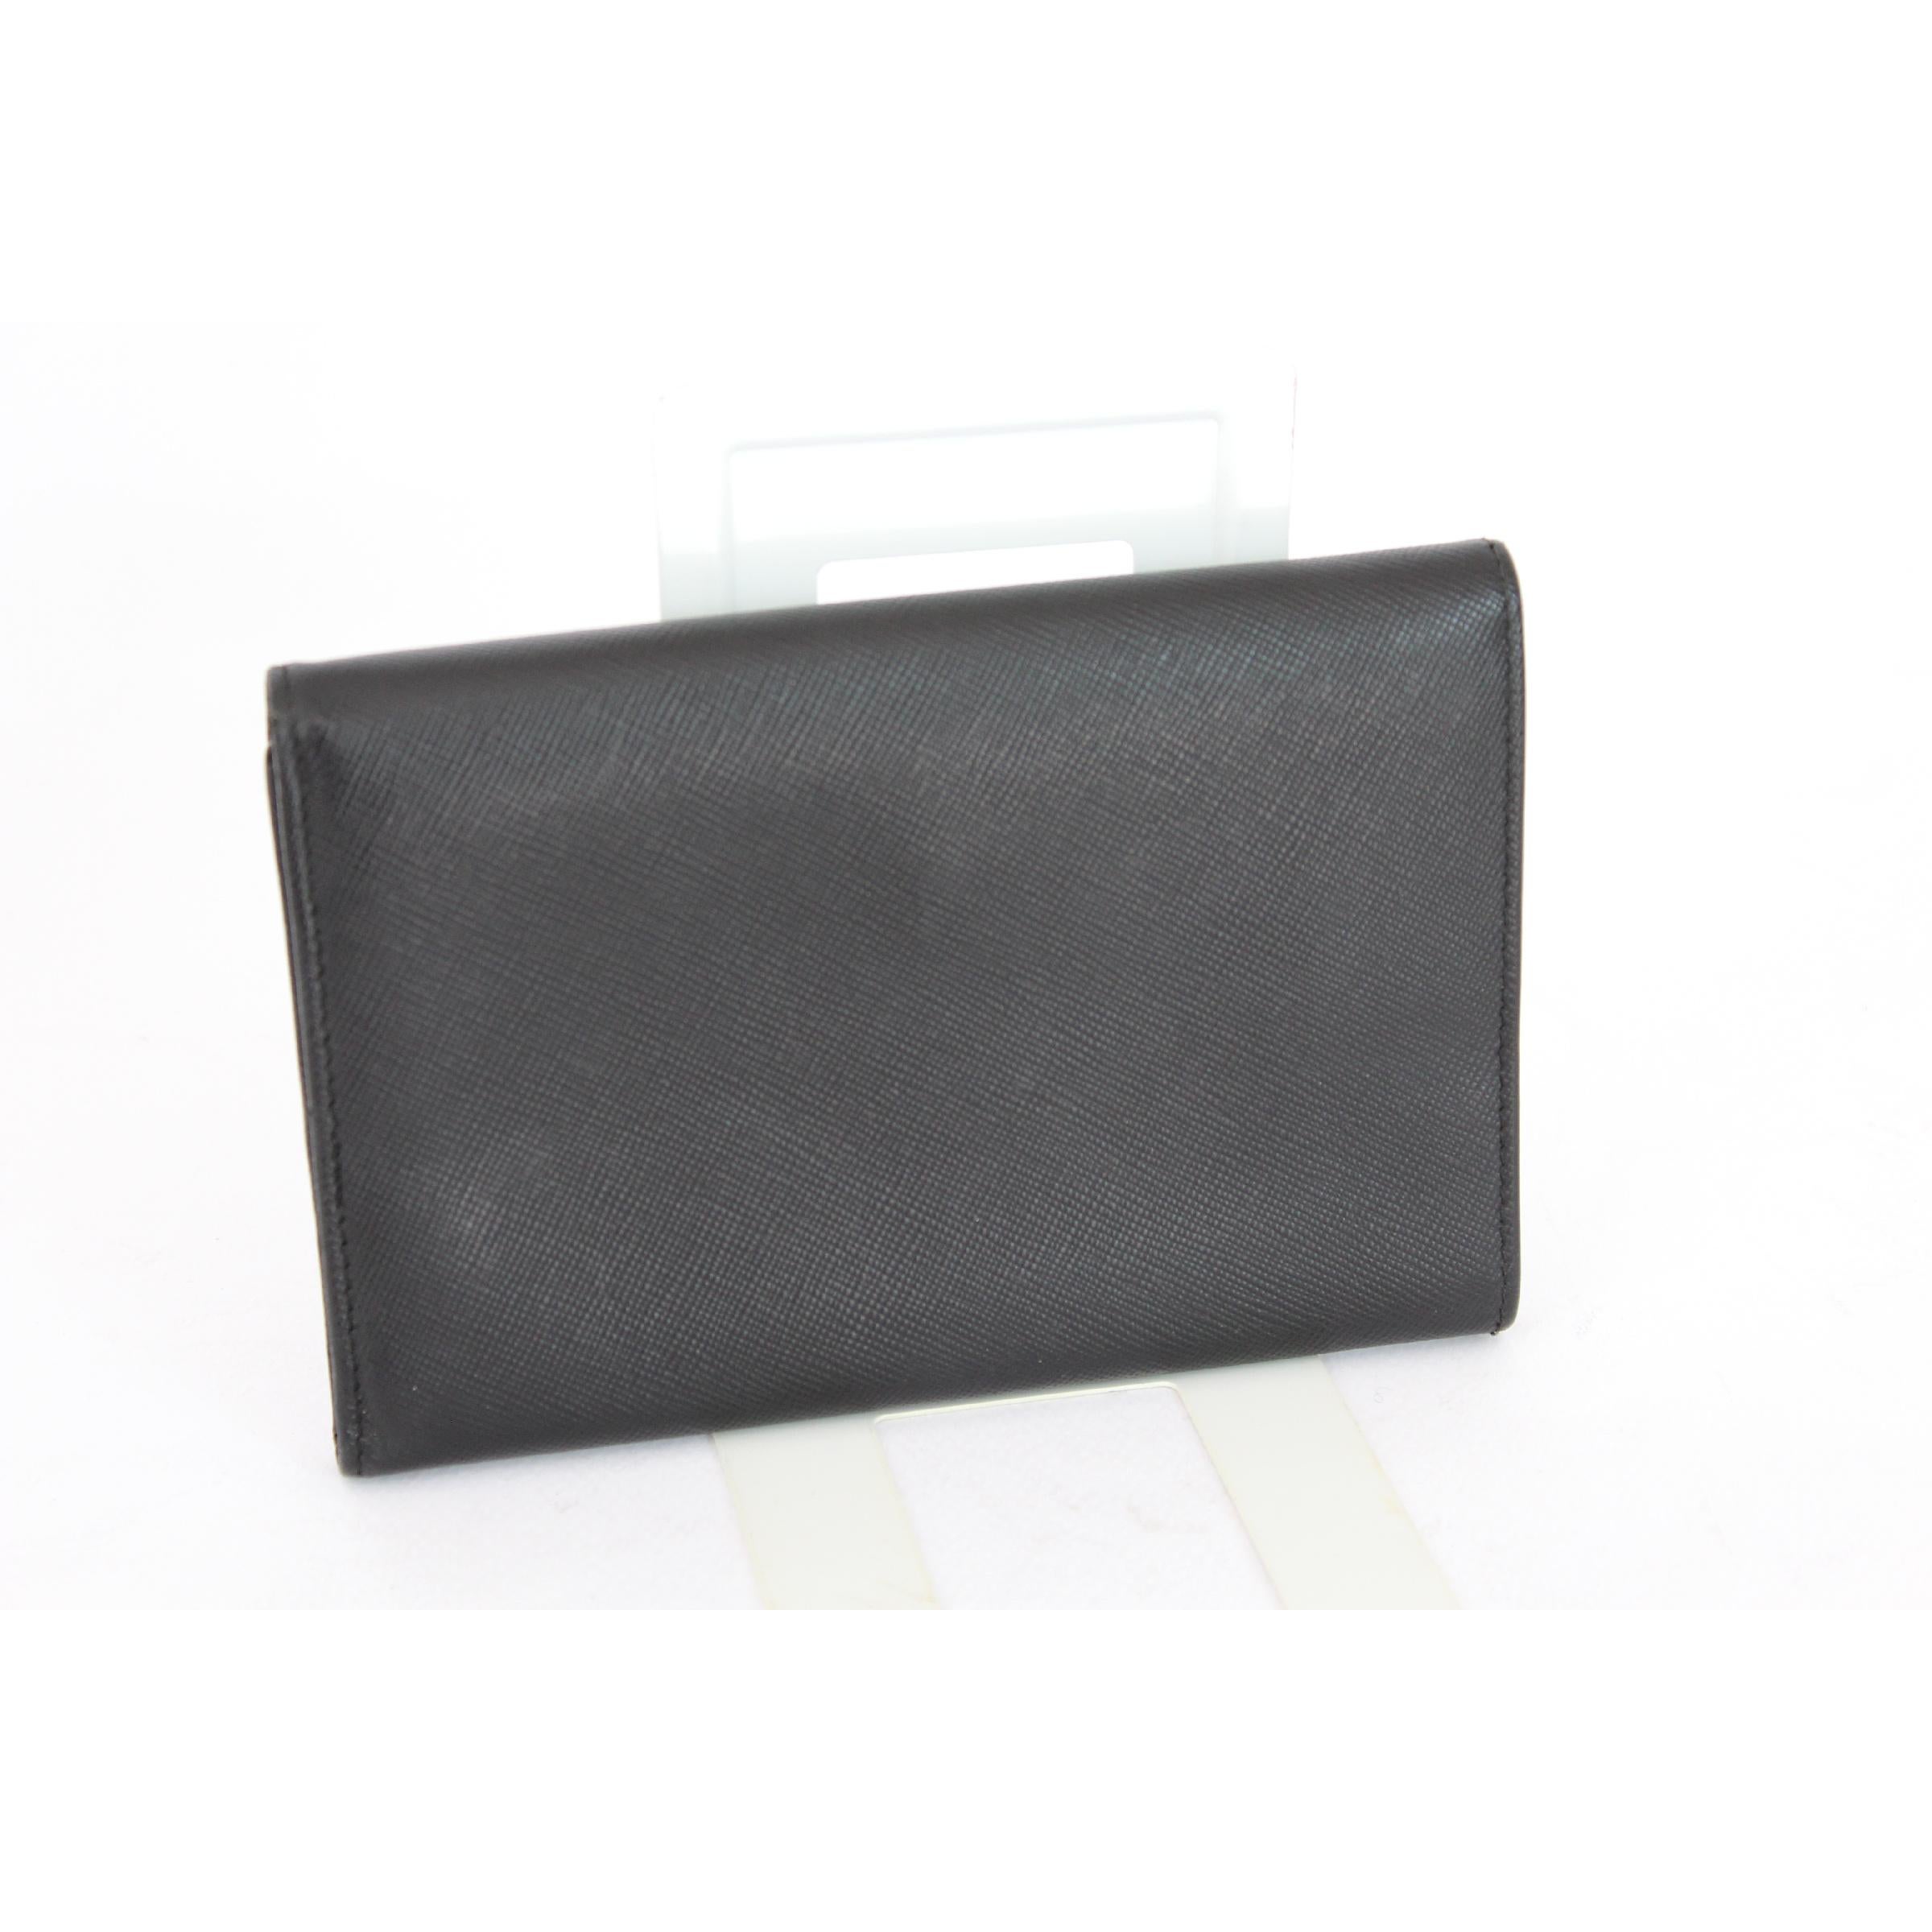 Vintage Leather Wallet Womens - 6 For Sale on 1stDibs